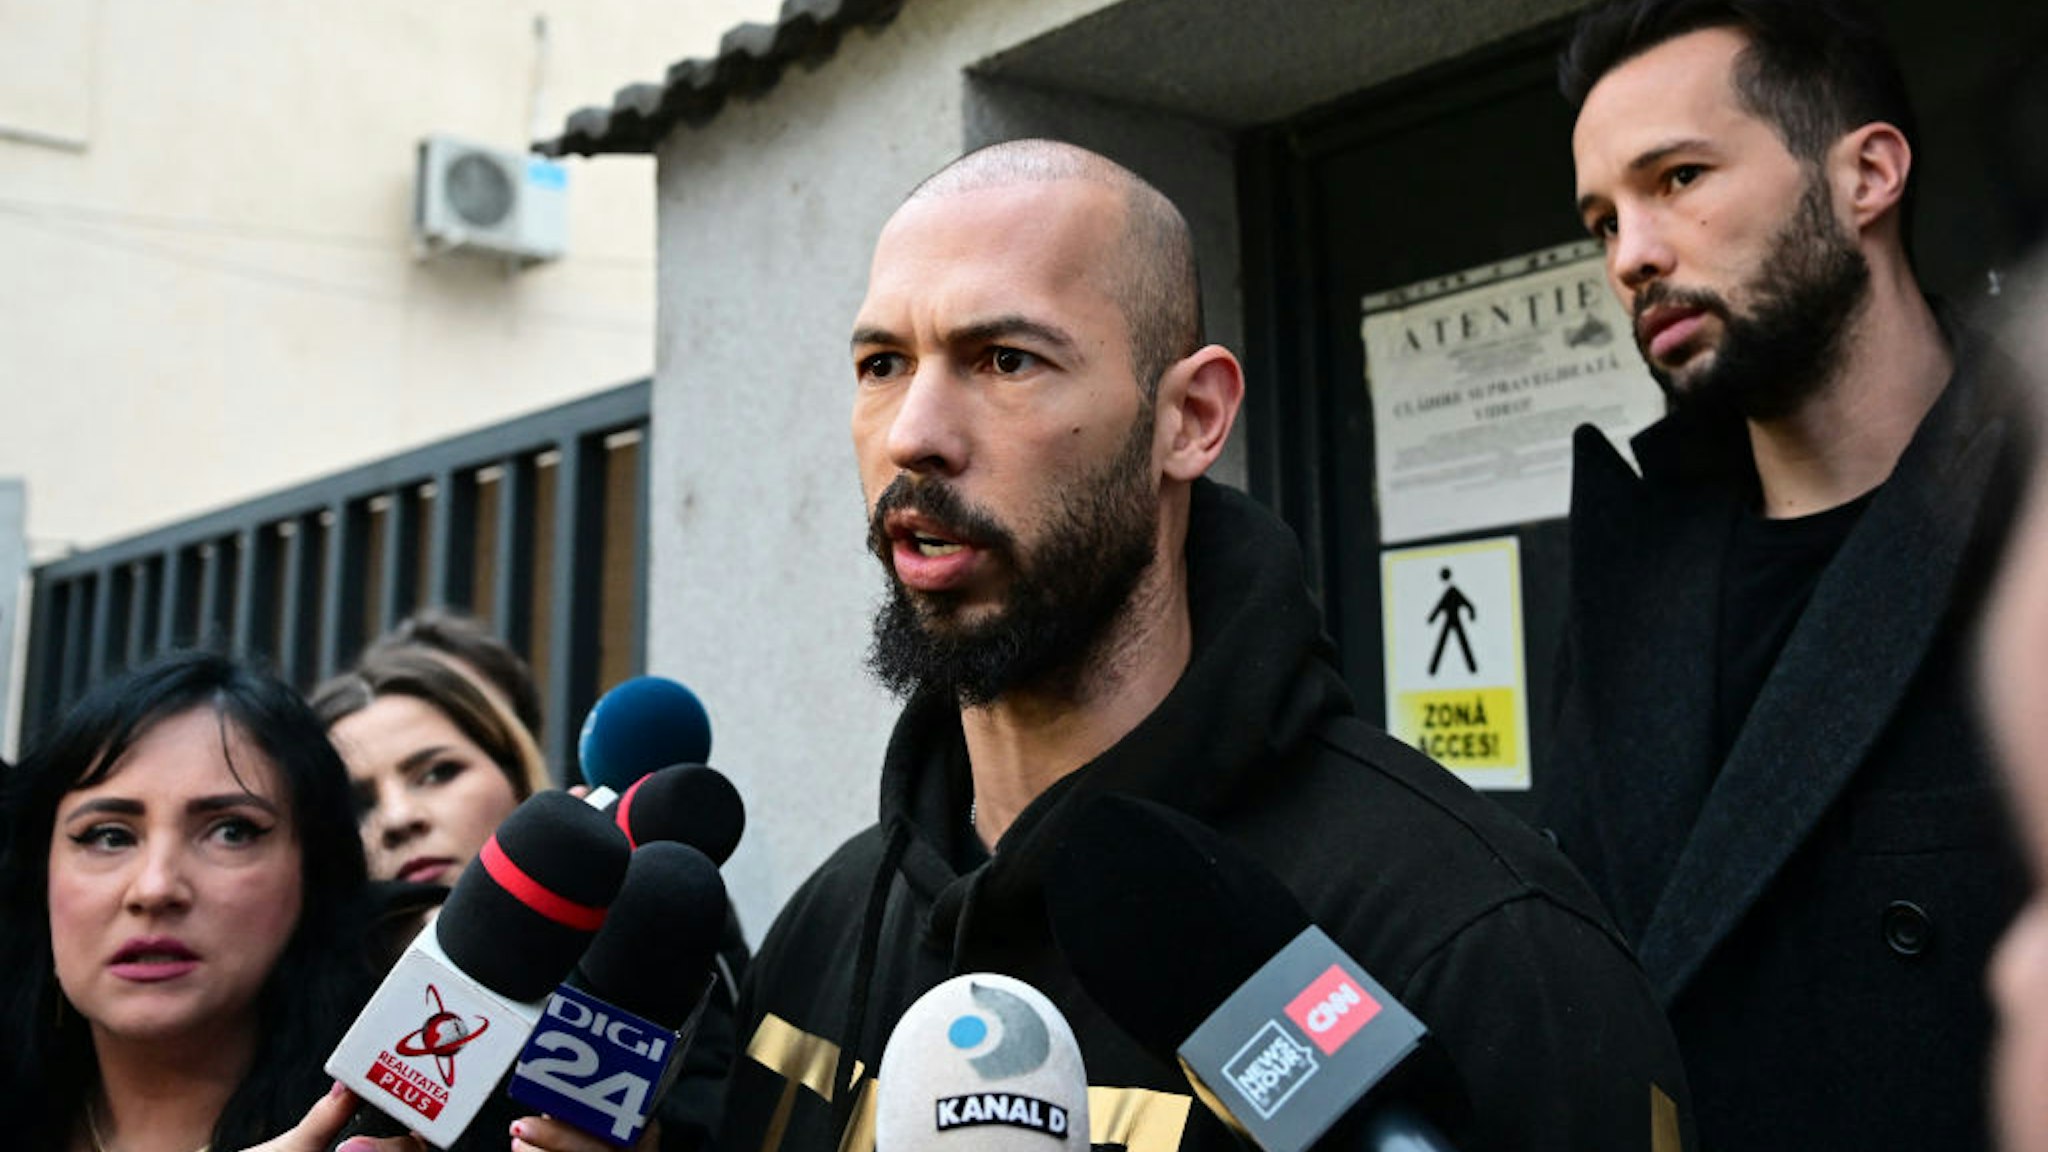 British-US former professional kickboxer and controversial influencer Andrew Tate (C) and his brother Tristan Tate (R) speak to journalists after having been released from detention in Bucharest, Romania on March 12, 2024, after they appeared in a court after Romanian police detained them over UK sex offence charges. A Bucharest court on March 12 granted a request to extradite controversial influencer Andrew Tate to the UK over sex offence charges, but only after the conclusion of legal proceedings in Romania in a separate case. The Bucharest appeals court ruling "orders the execution of the warrant of arrest issued on 19 January 2024" by the Westminster Magistrates' Court, but postpones extradition "until the final resolution of the case" in Romania, which could take years. (Photo by Daniel MIHAILESCU / AFP) (Photo by DANIEL MIHAILESCU/AFP via Getty Images)